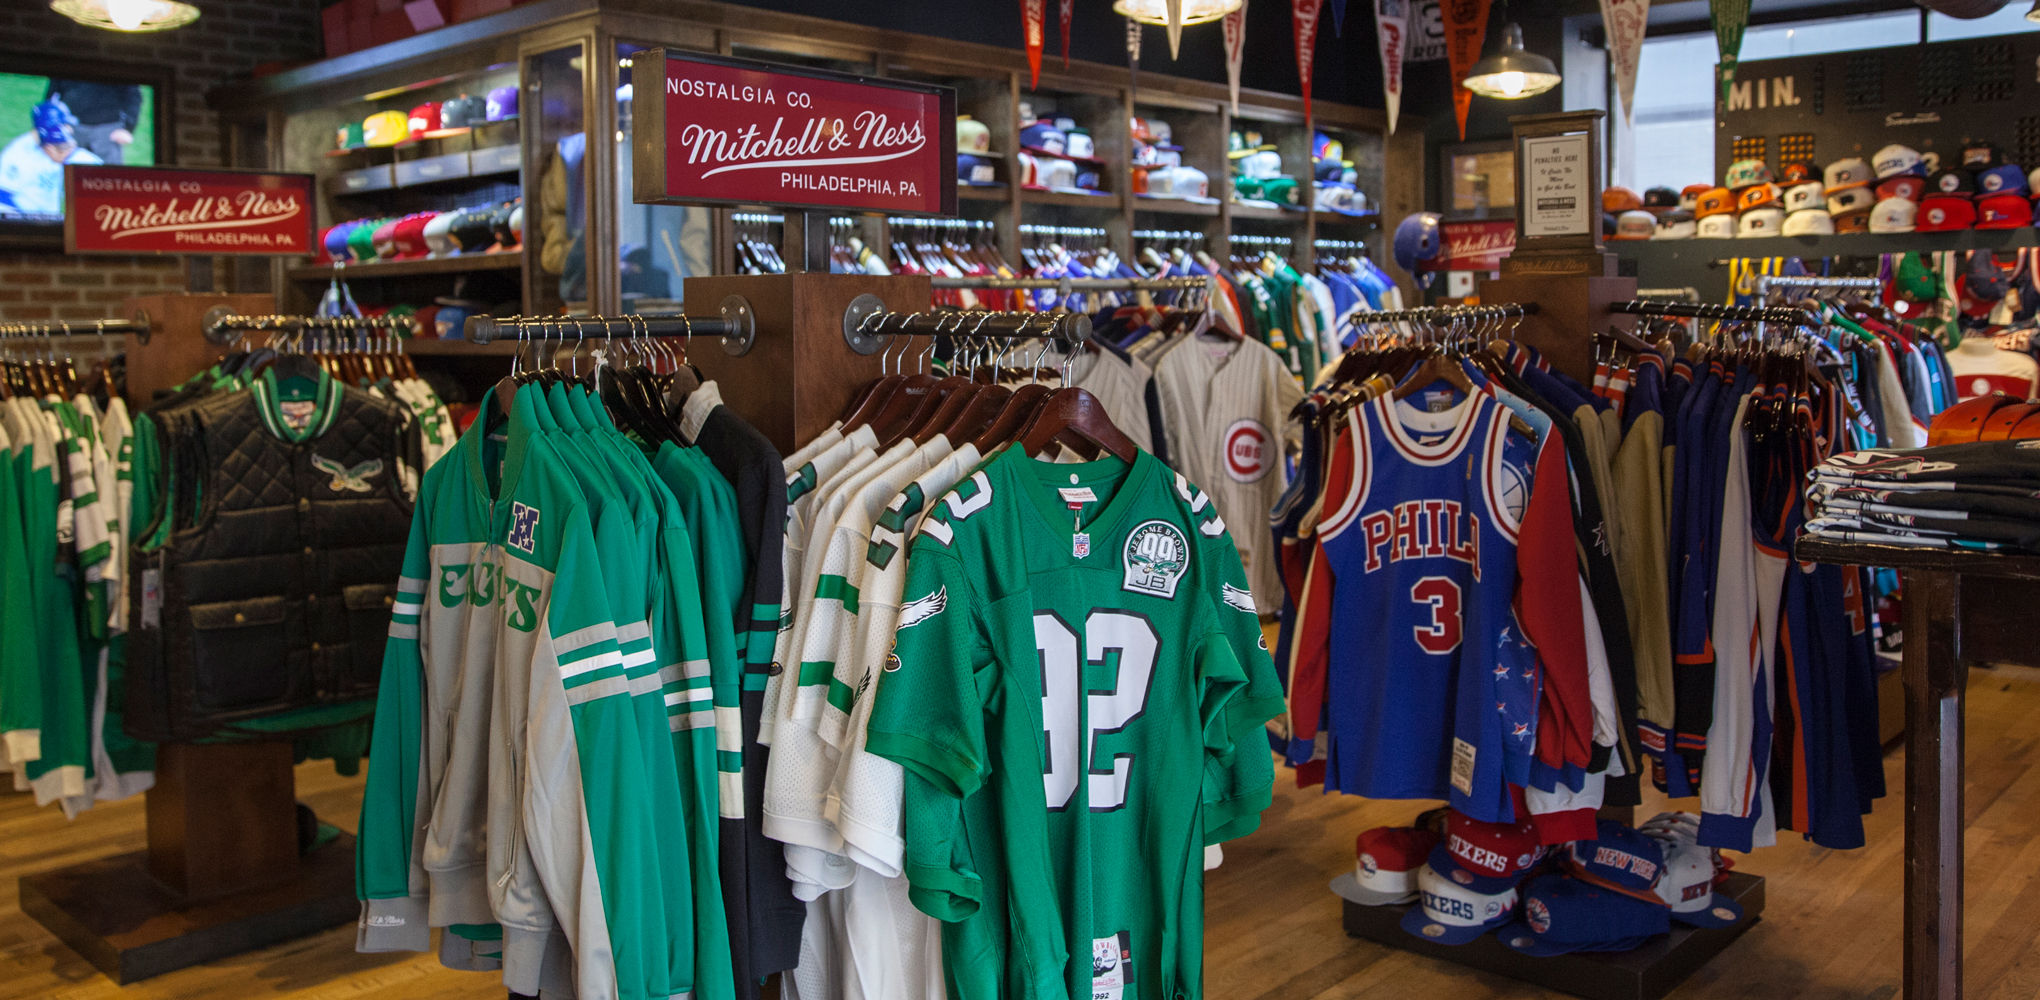 The History Of Iconic Apparel Company Mitchell And Ness